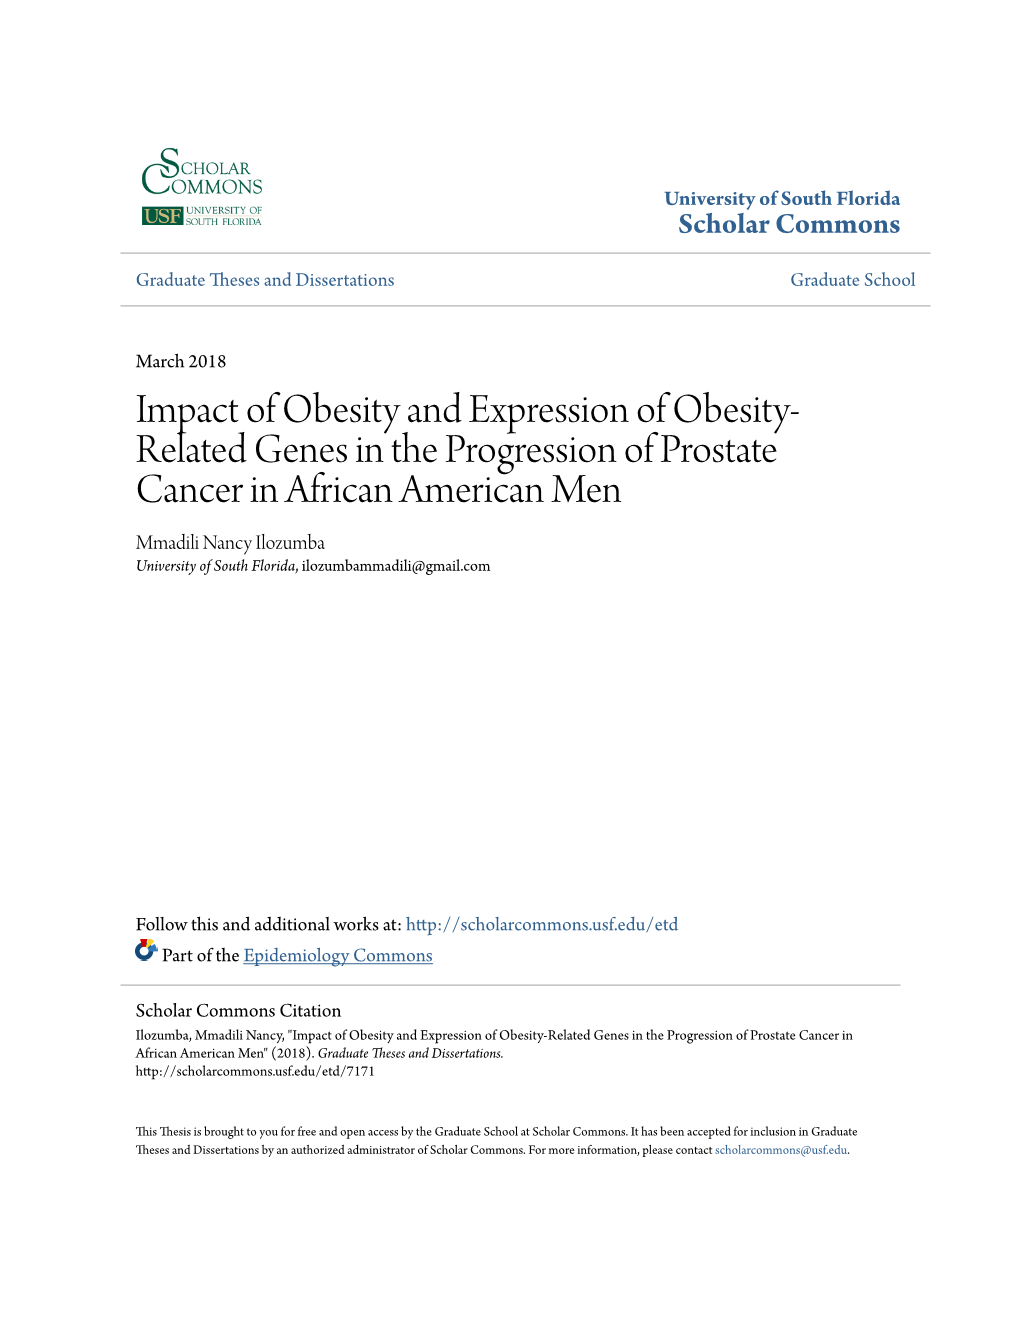 Impact of Obesity and Expression of Obesity-Related Genes in the Progression of Prostate Cancer in African American Men" (2018)